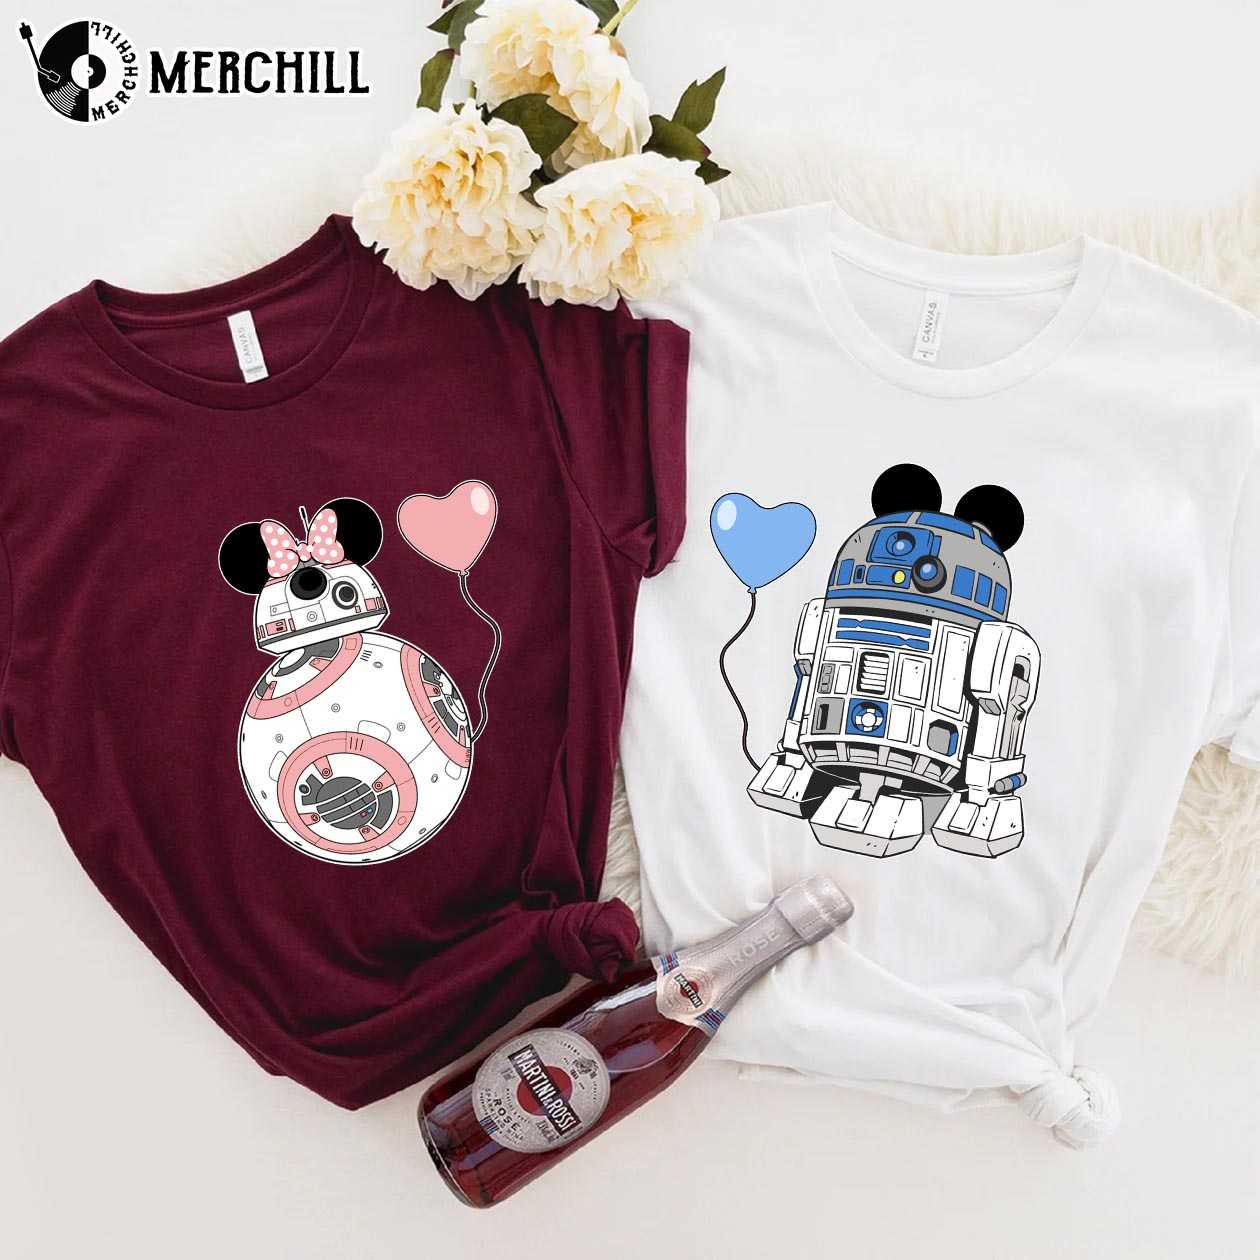 Star Wars Couples Gift Set Disney Star Wars Couple Shirt I Love You I Know  Shirt Disney Couple Shirt Valentines Day Gifts 